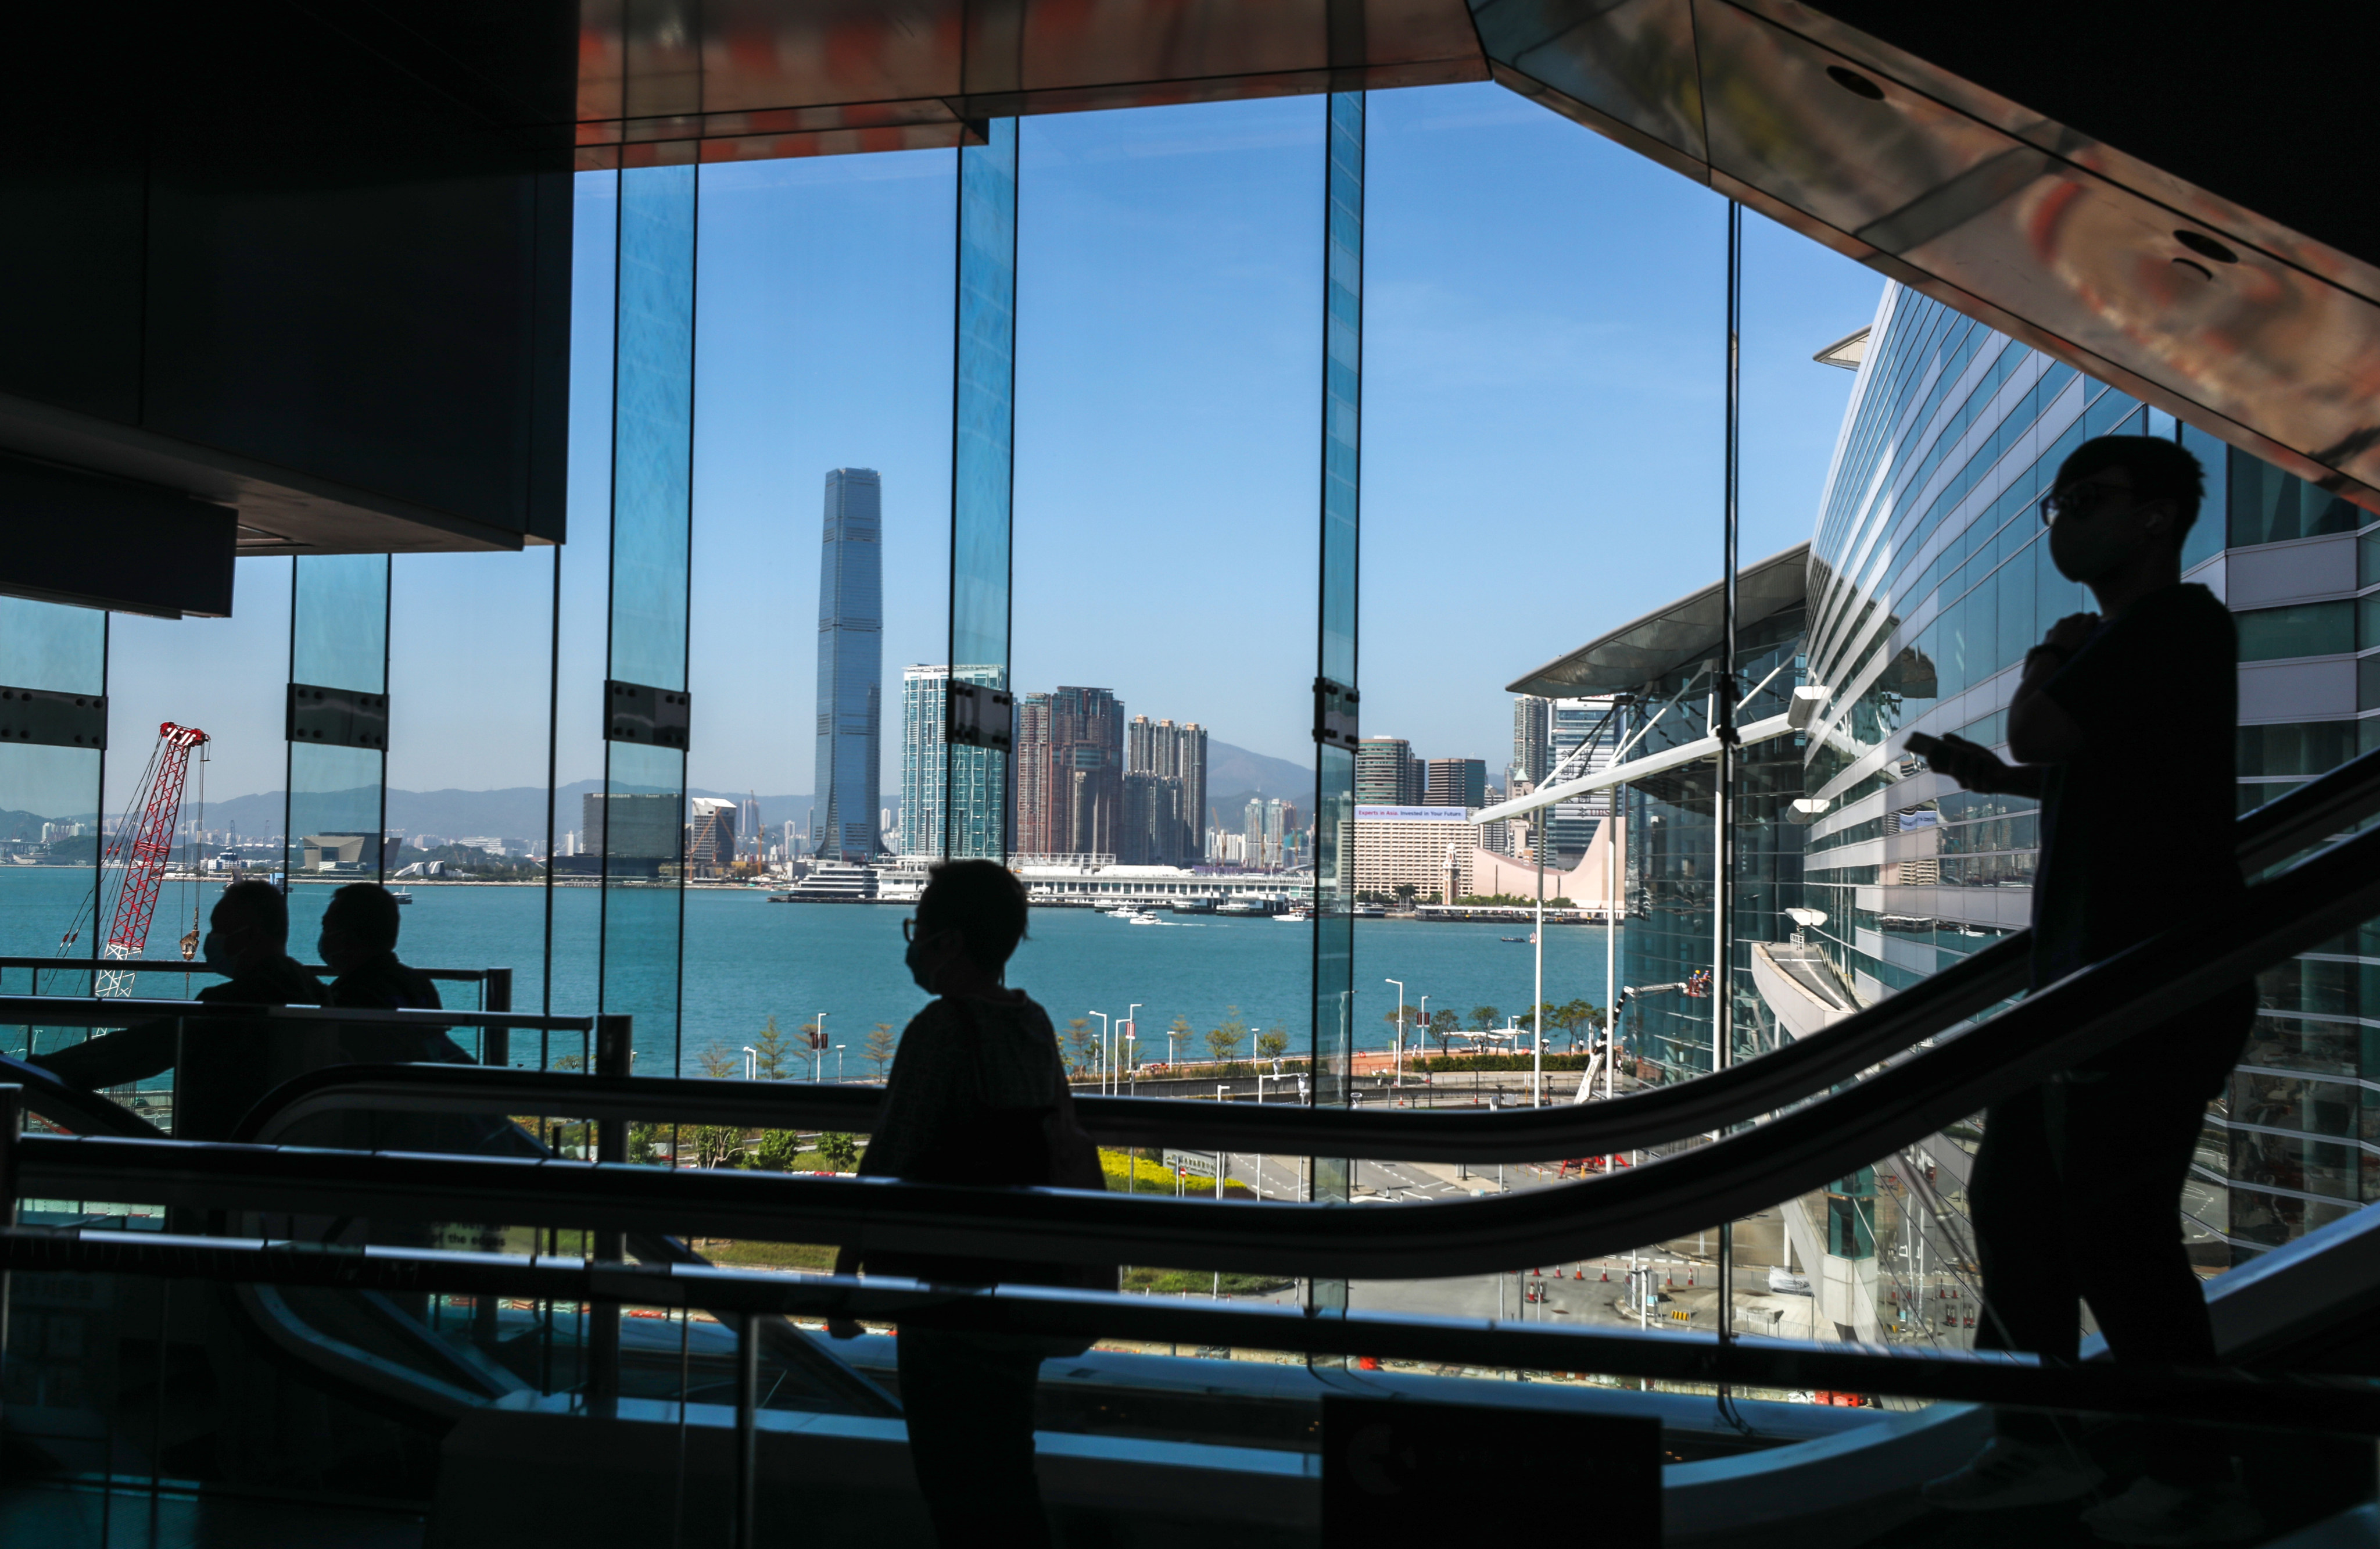 Hong Kong remains the most expensive location in Asia for business